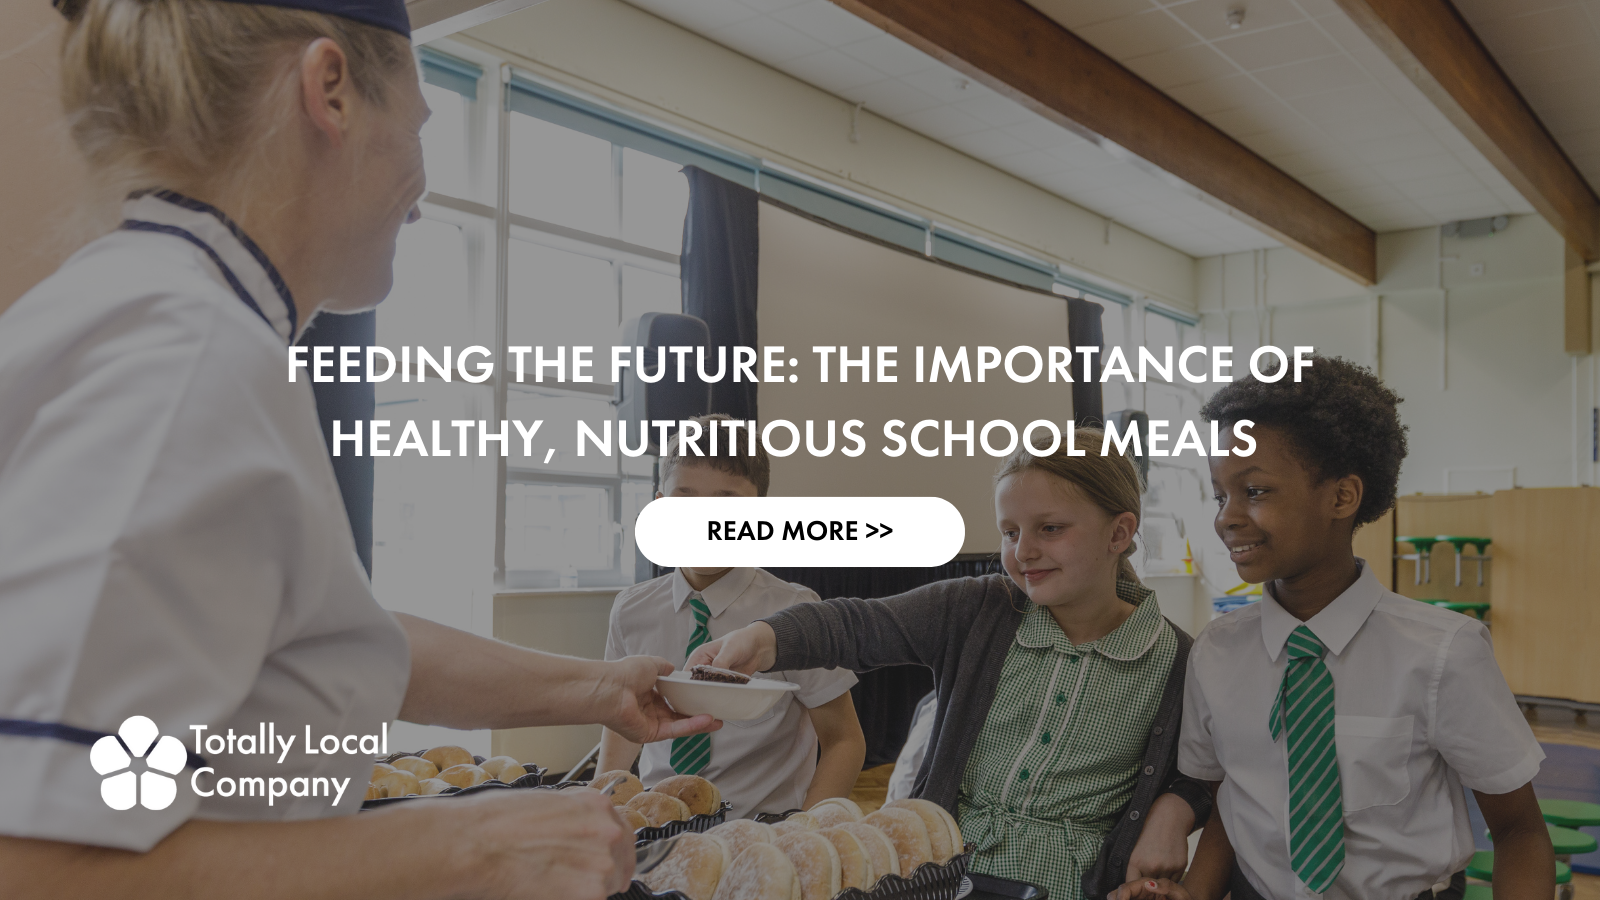 Feeding the Future: The Importance of Healthy, Nutritious School Meals